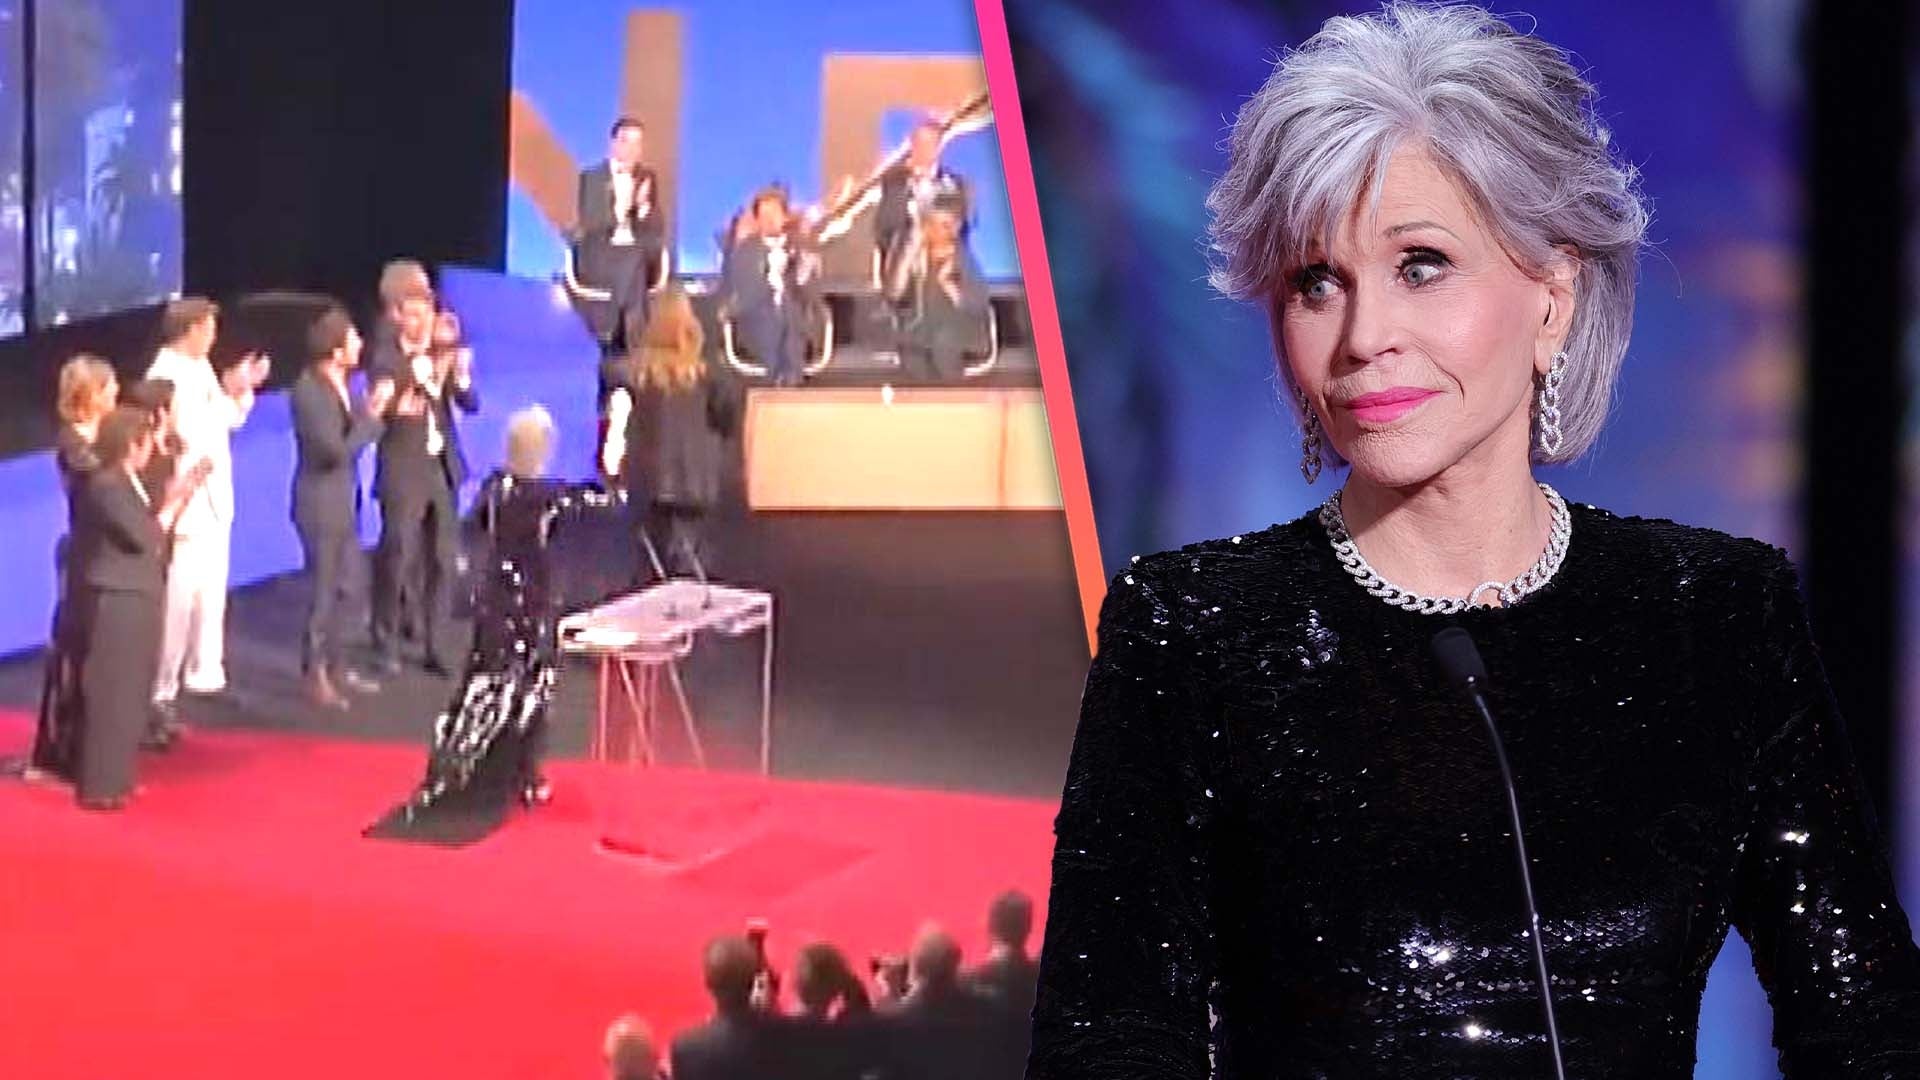 Jane Fonda Throws Palme d'Or Scroll at Director at the Cannes Film Festival 